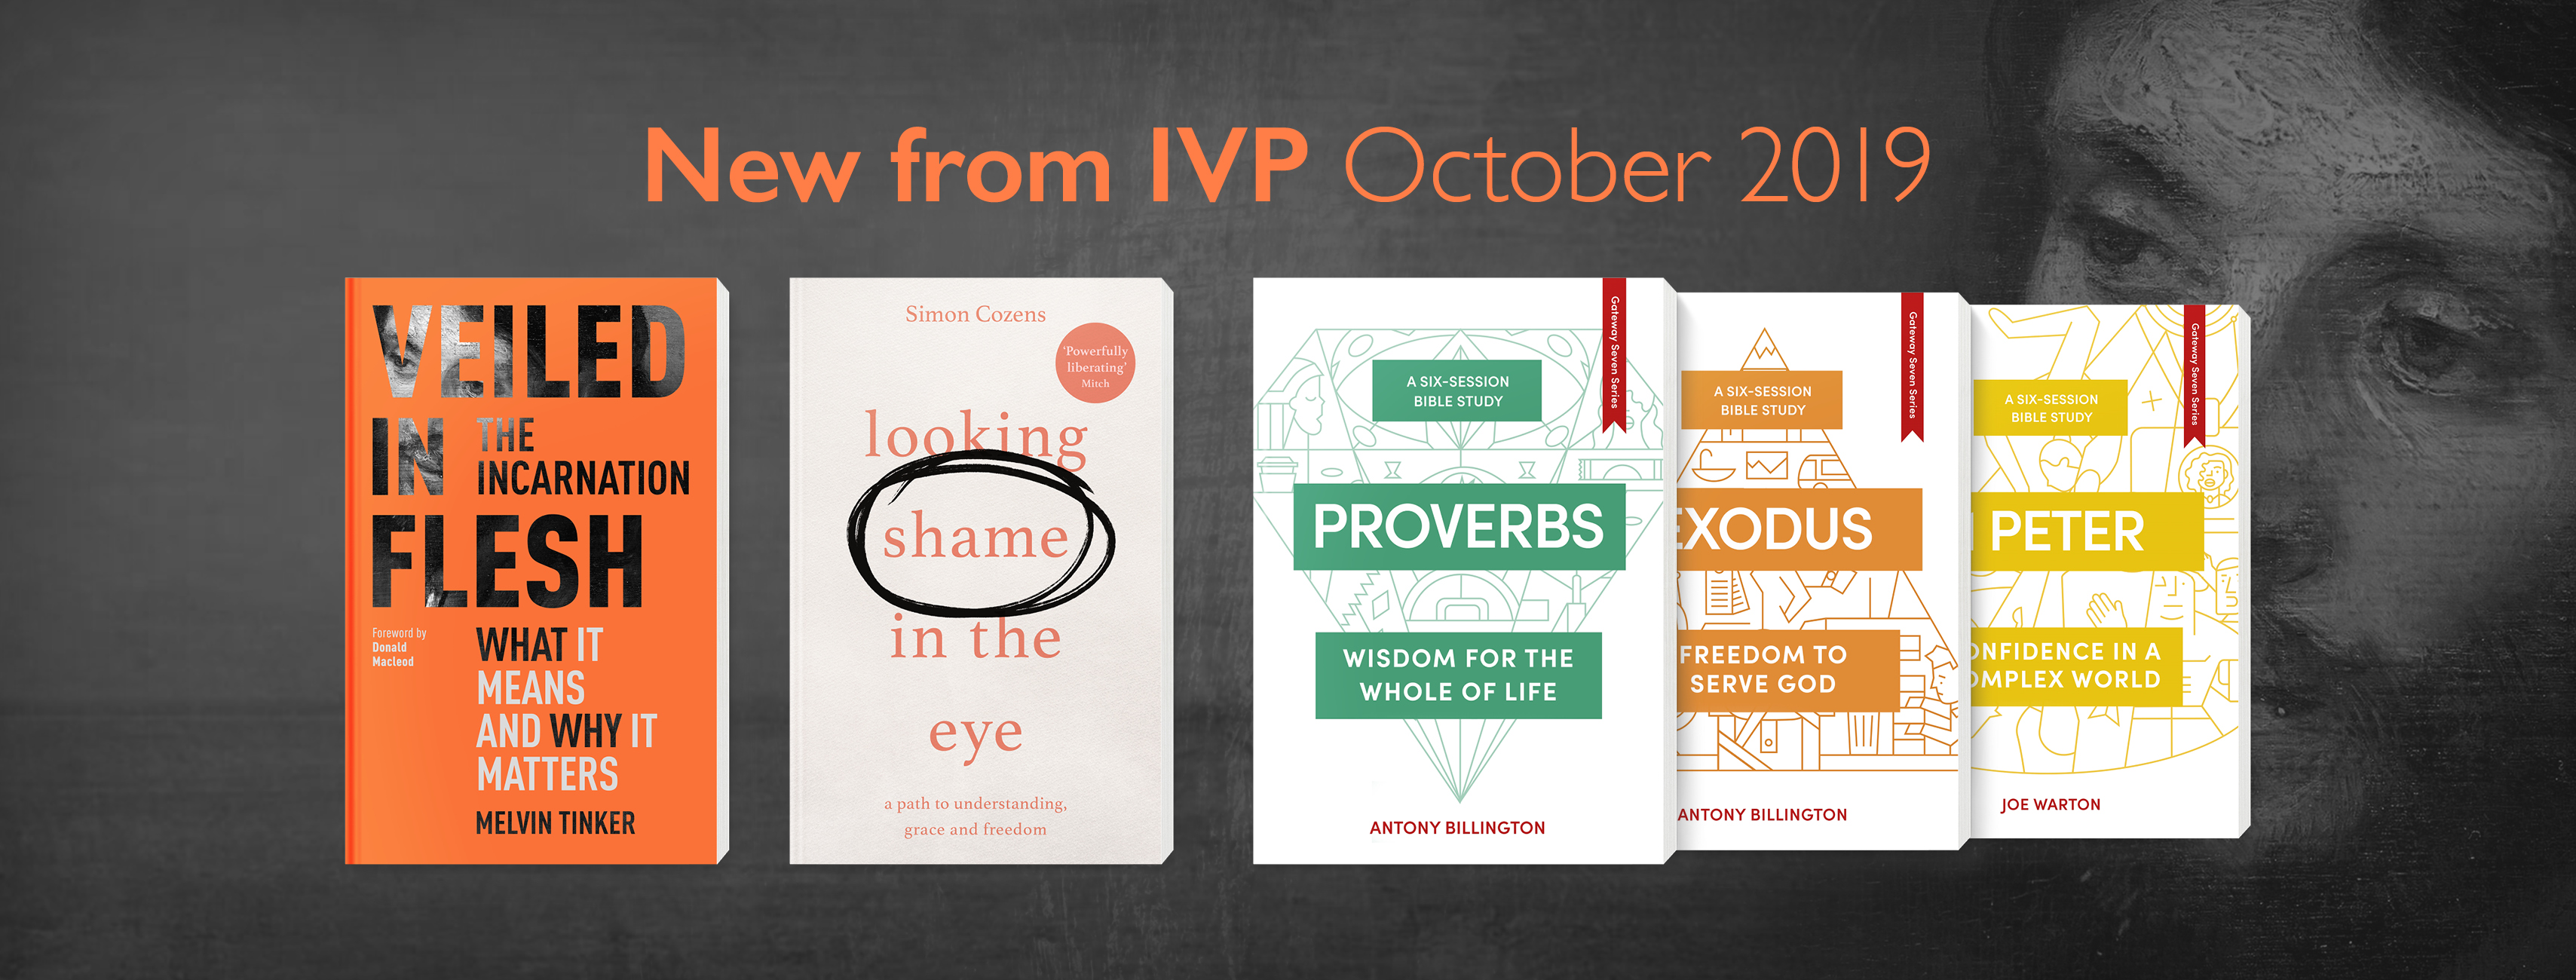 The IVP October 2019 Releases